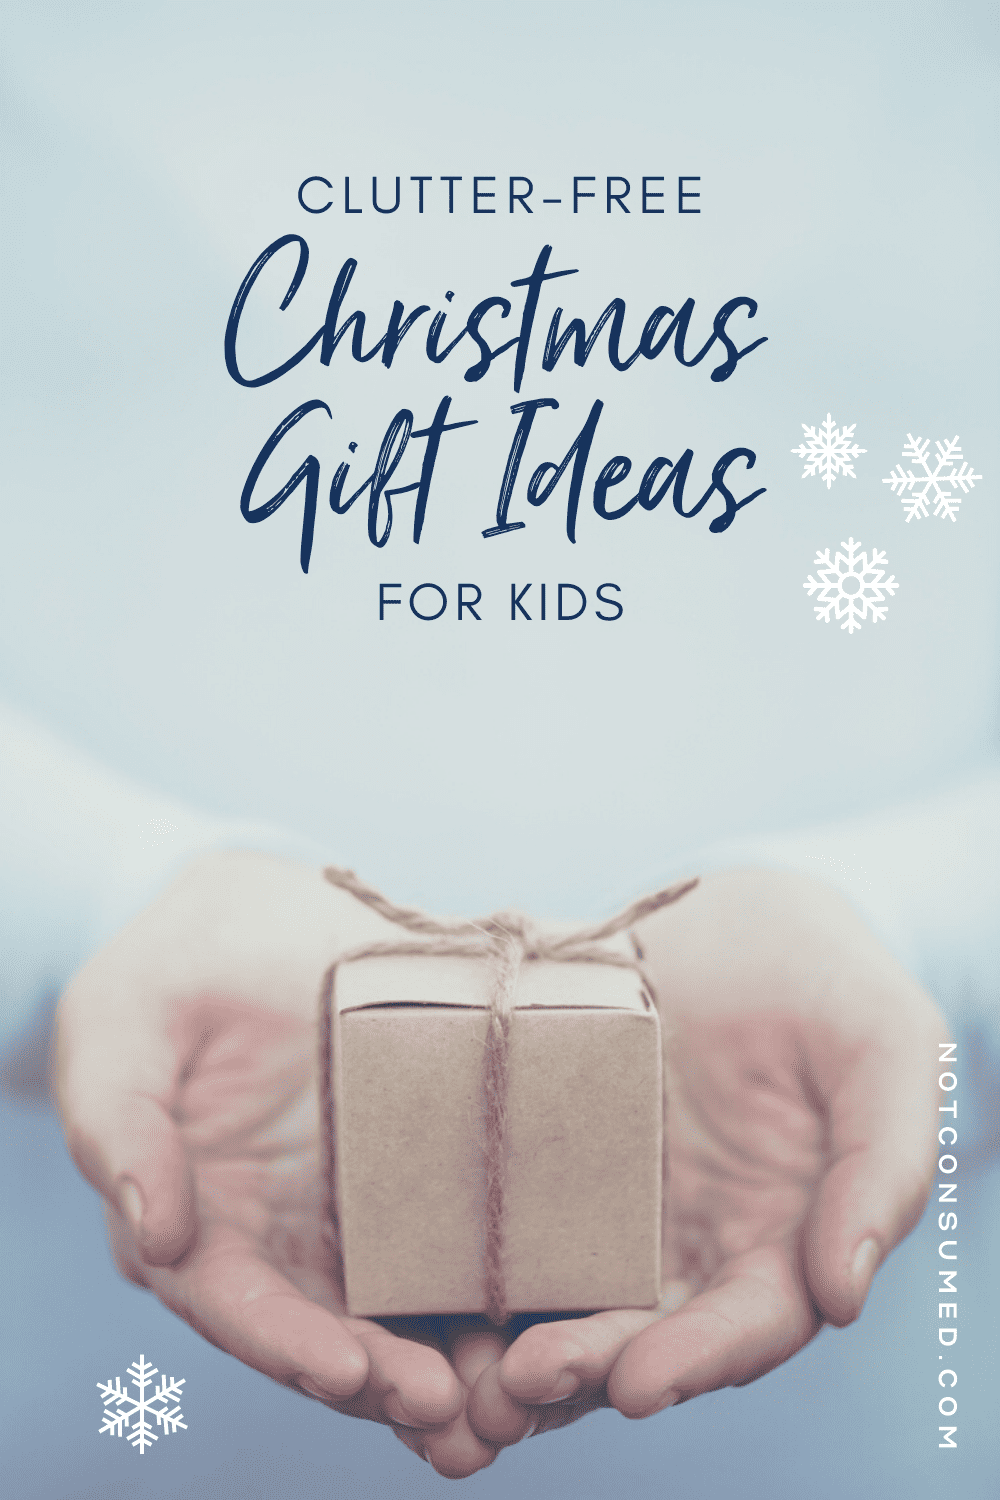 Clutter-Free Christmas Gift Ideas